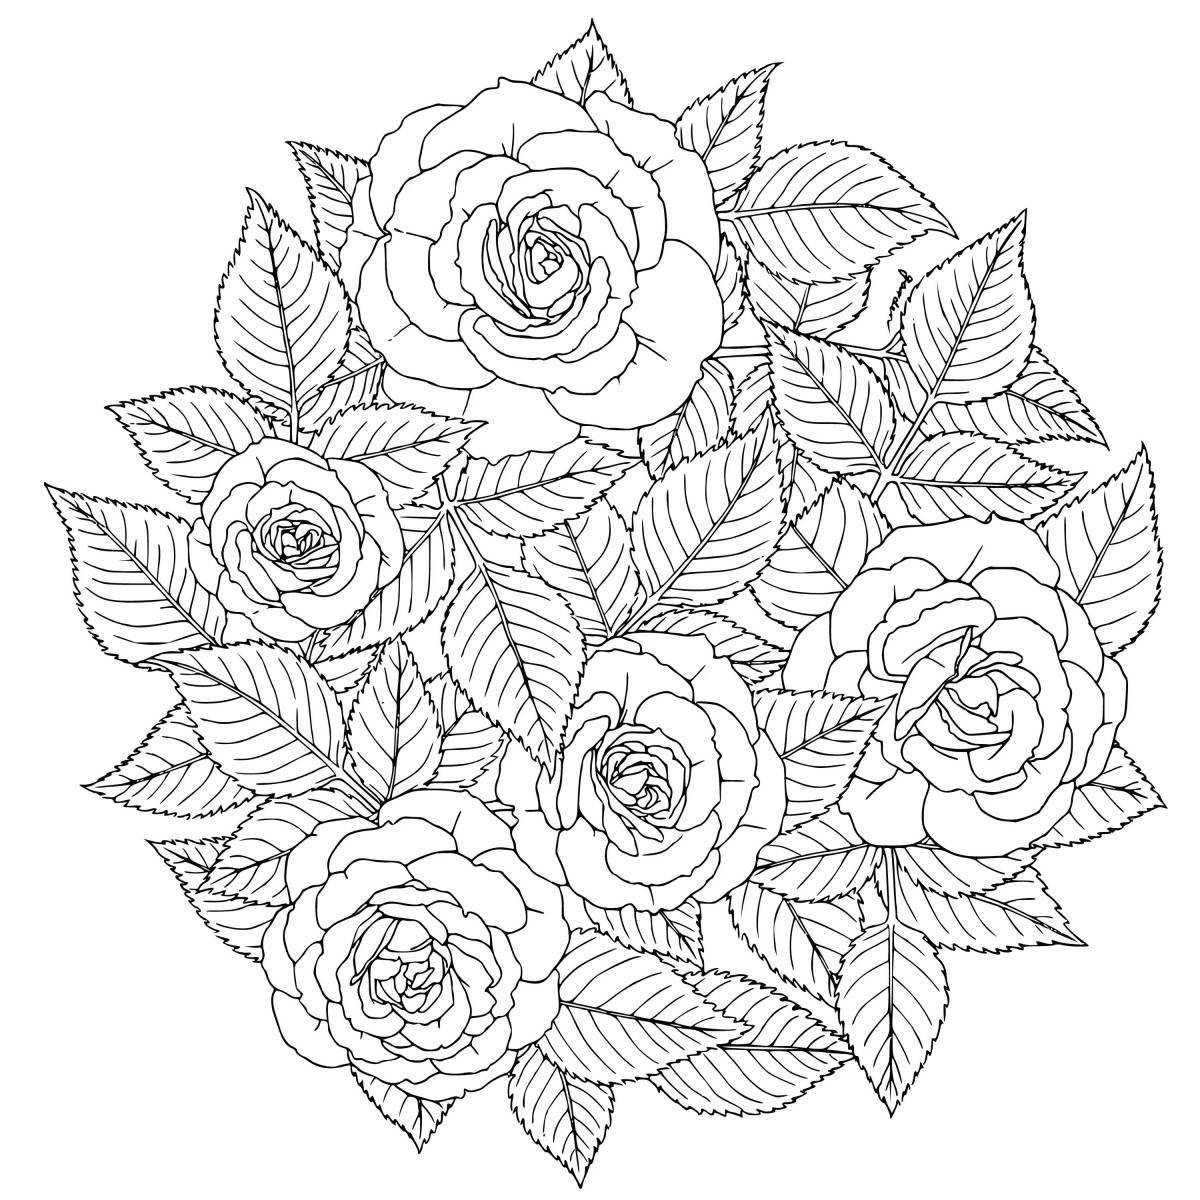 Fancy coloring for adults, large